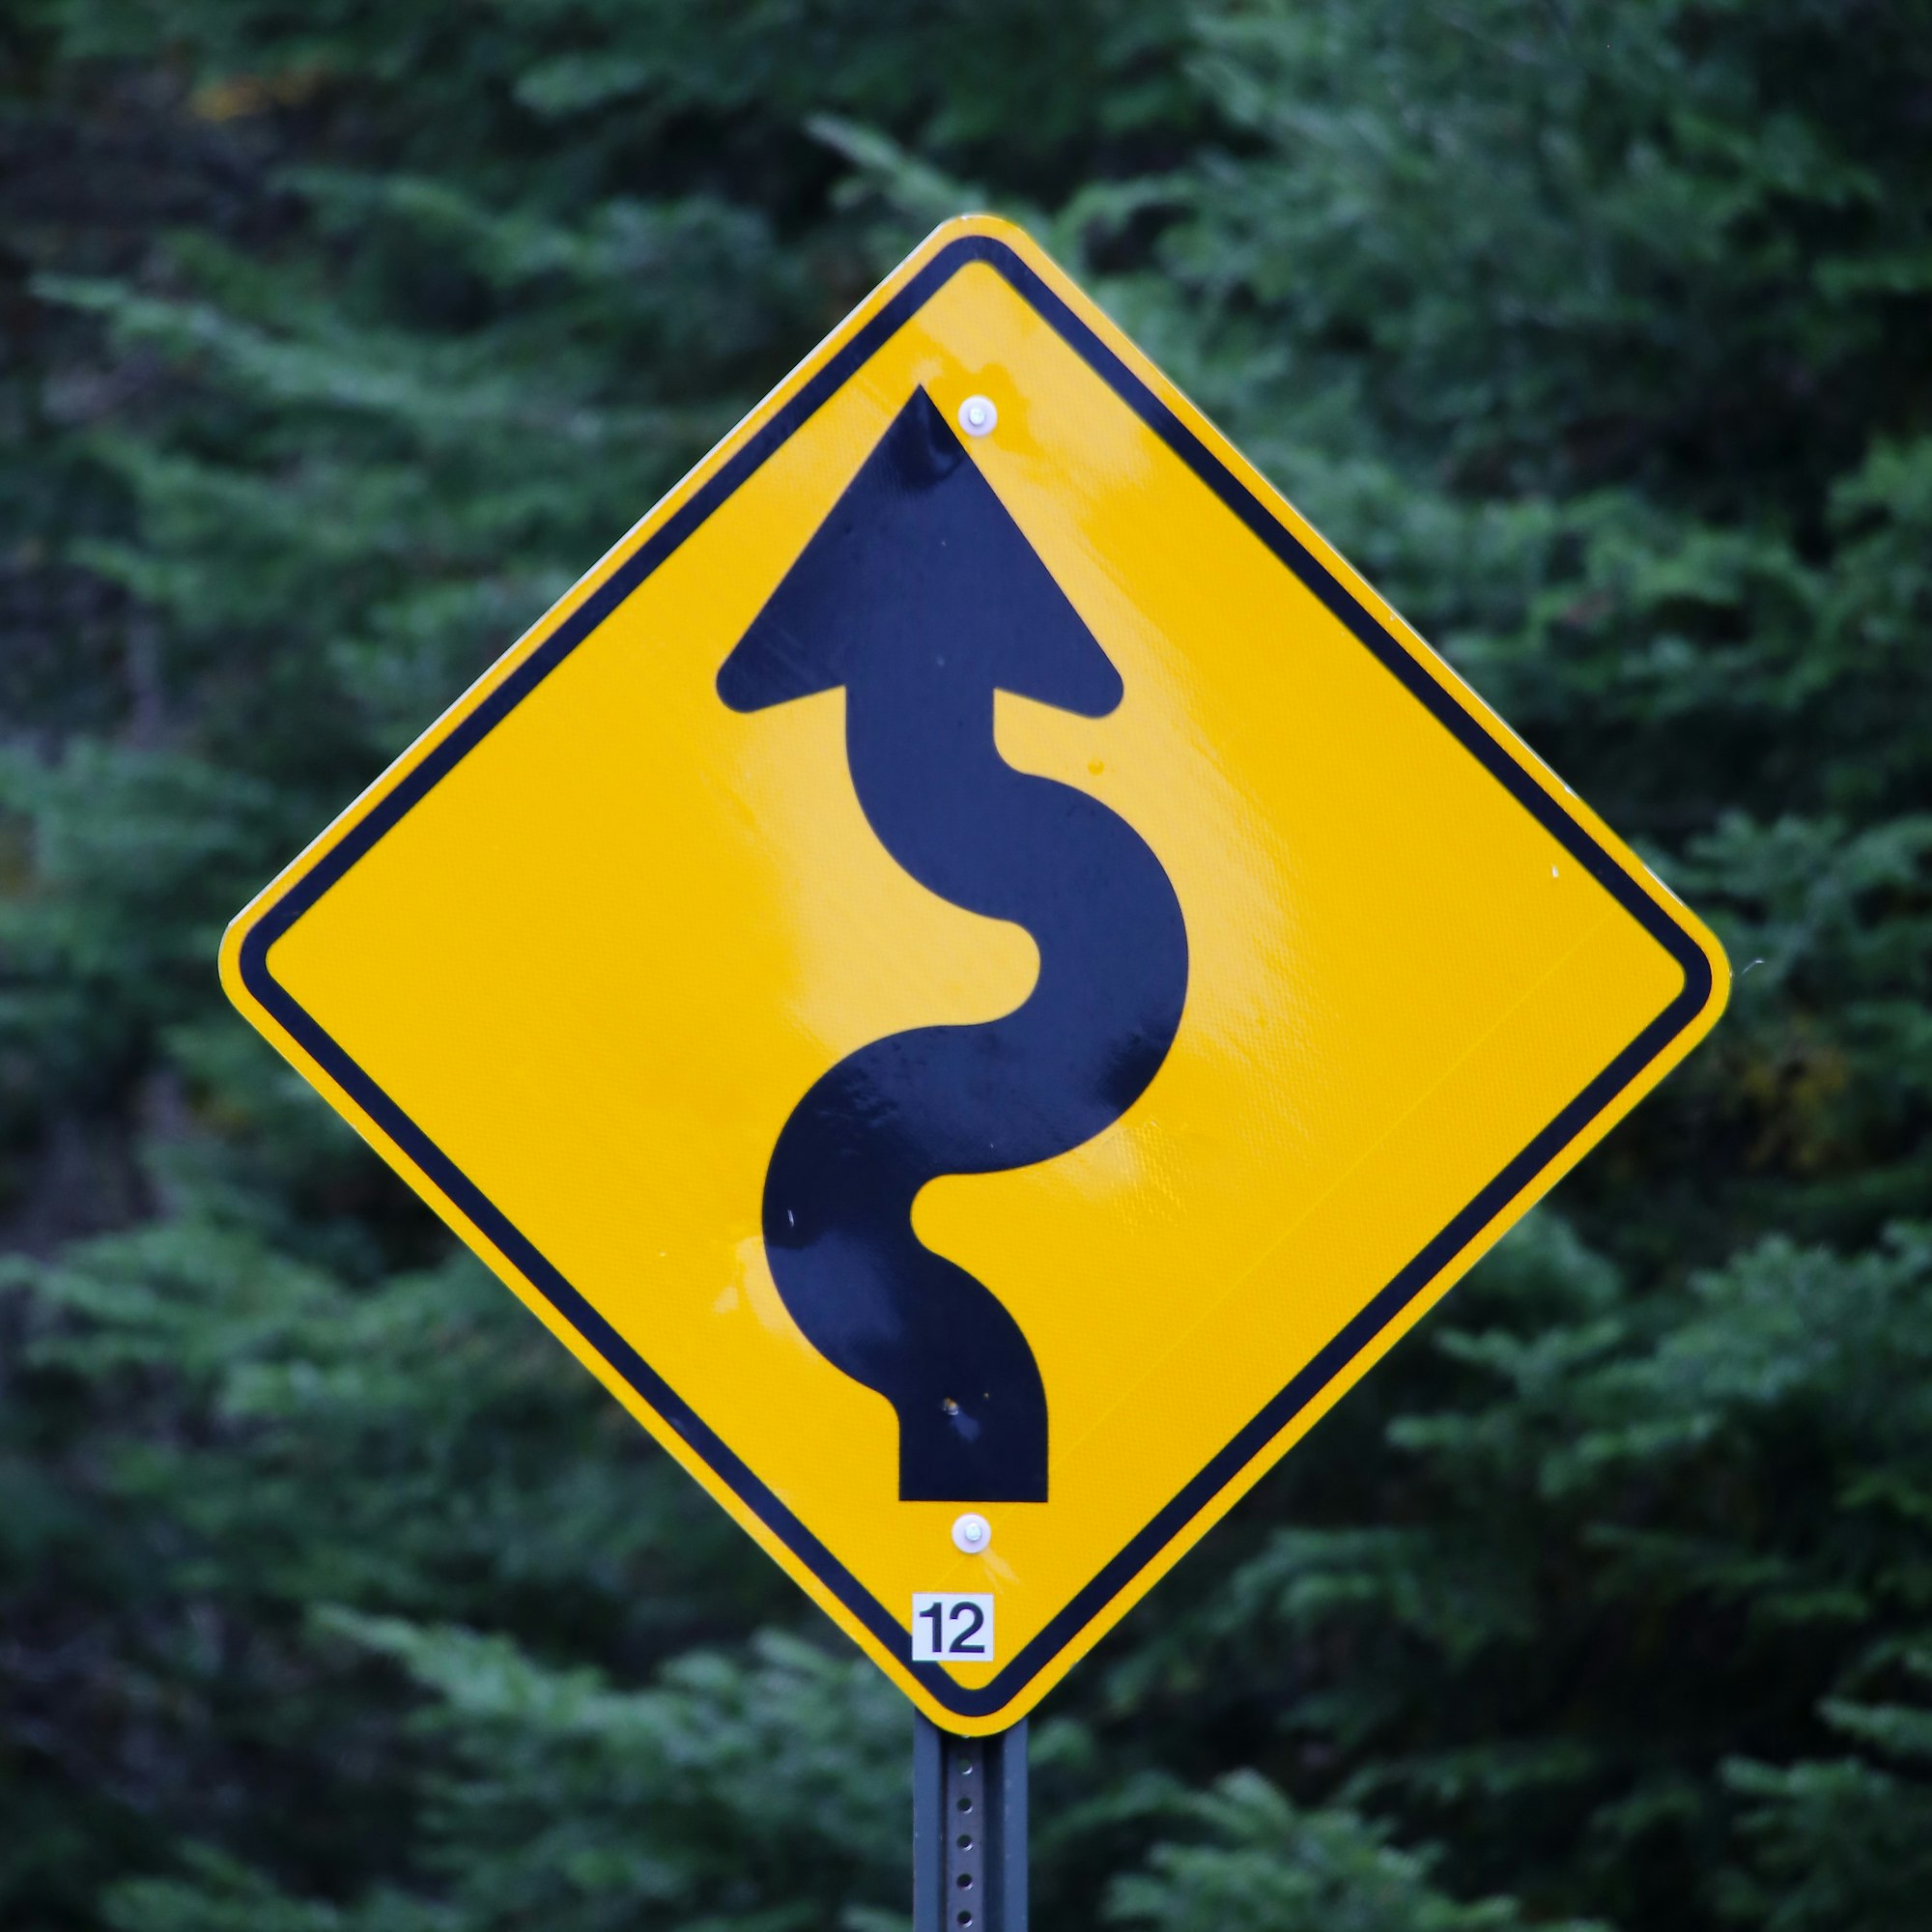 Road sign for curved road ahead. 
Storytelling: Could also be used when things are / were not realized in a direct way.